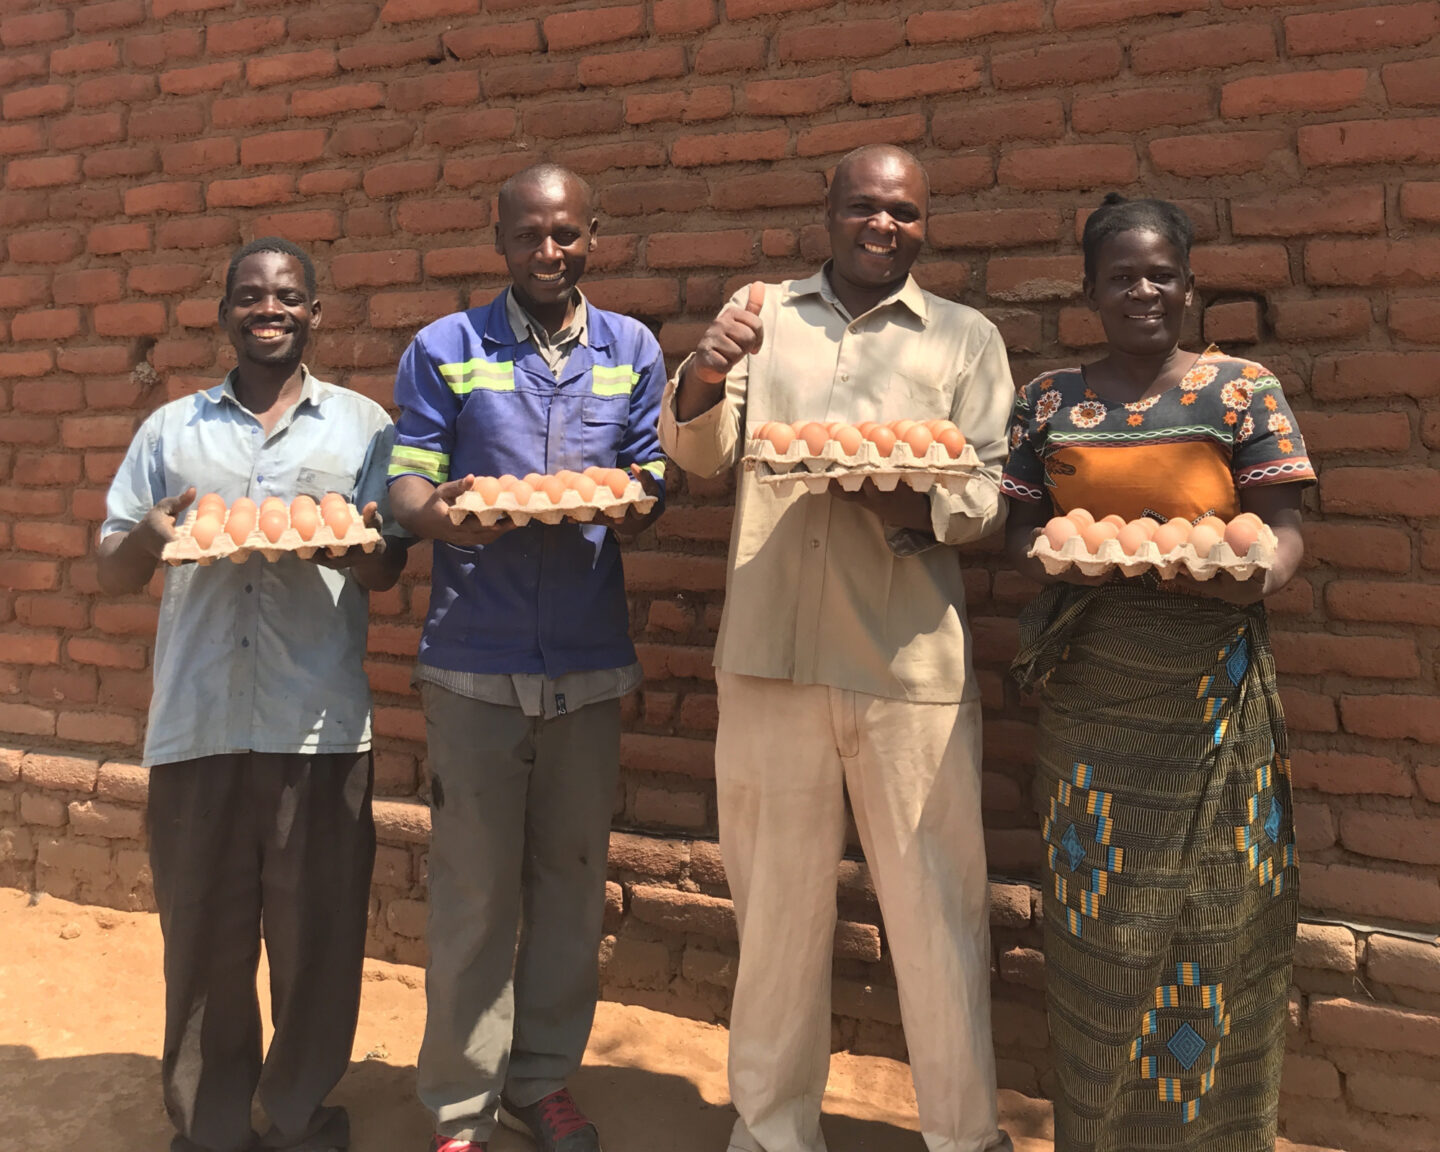 A group of farmers hold cartons of eggs in Malawi